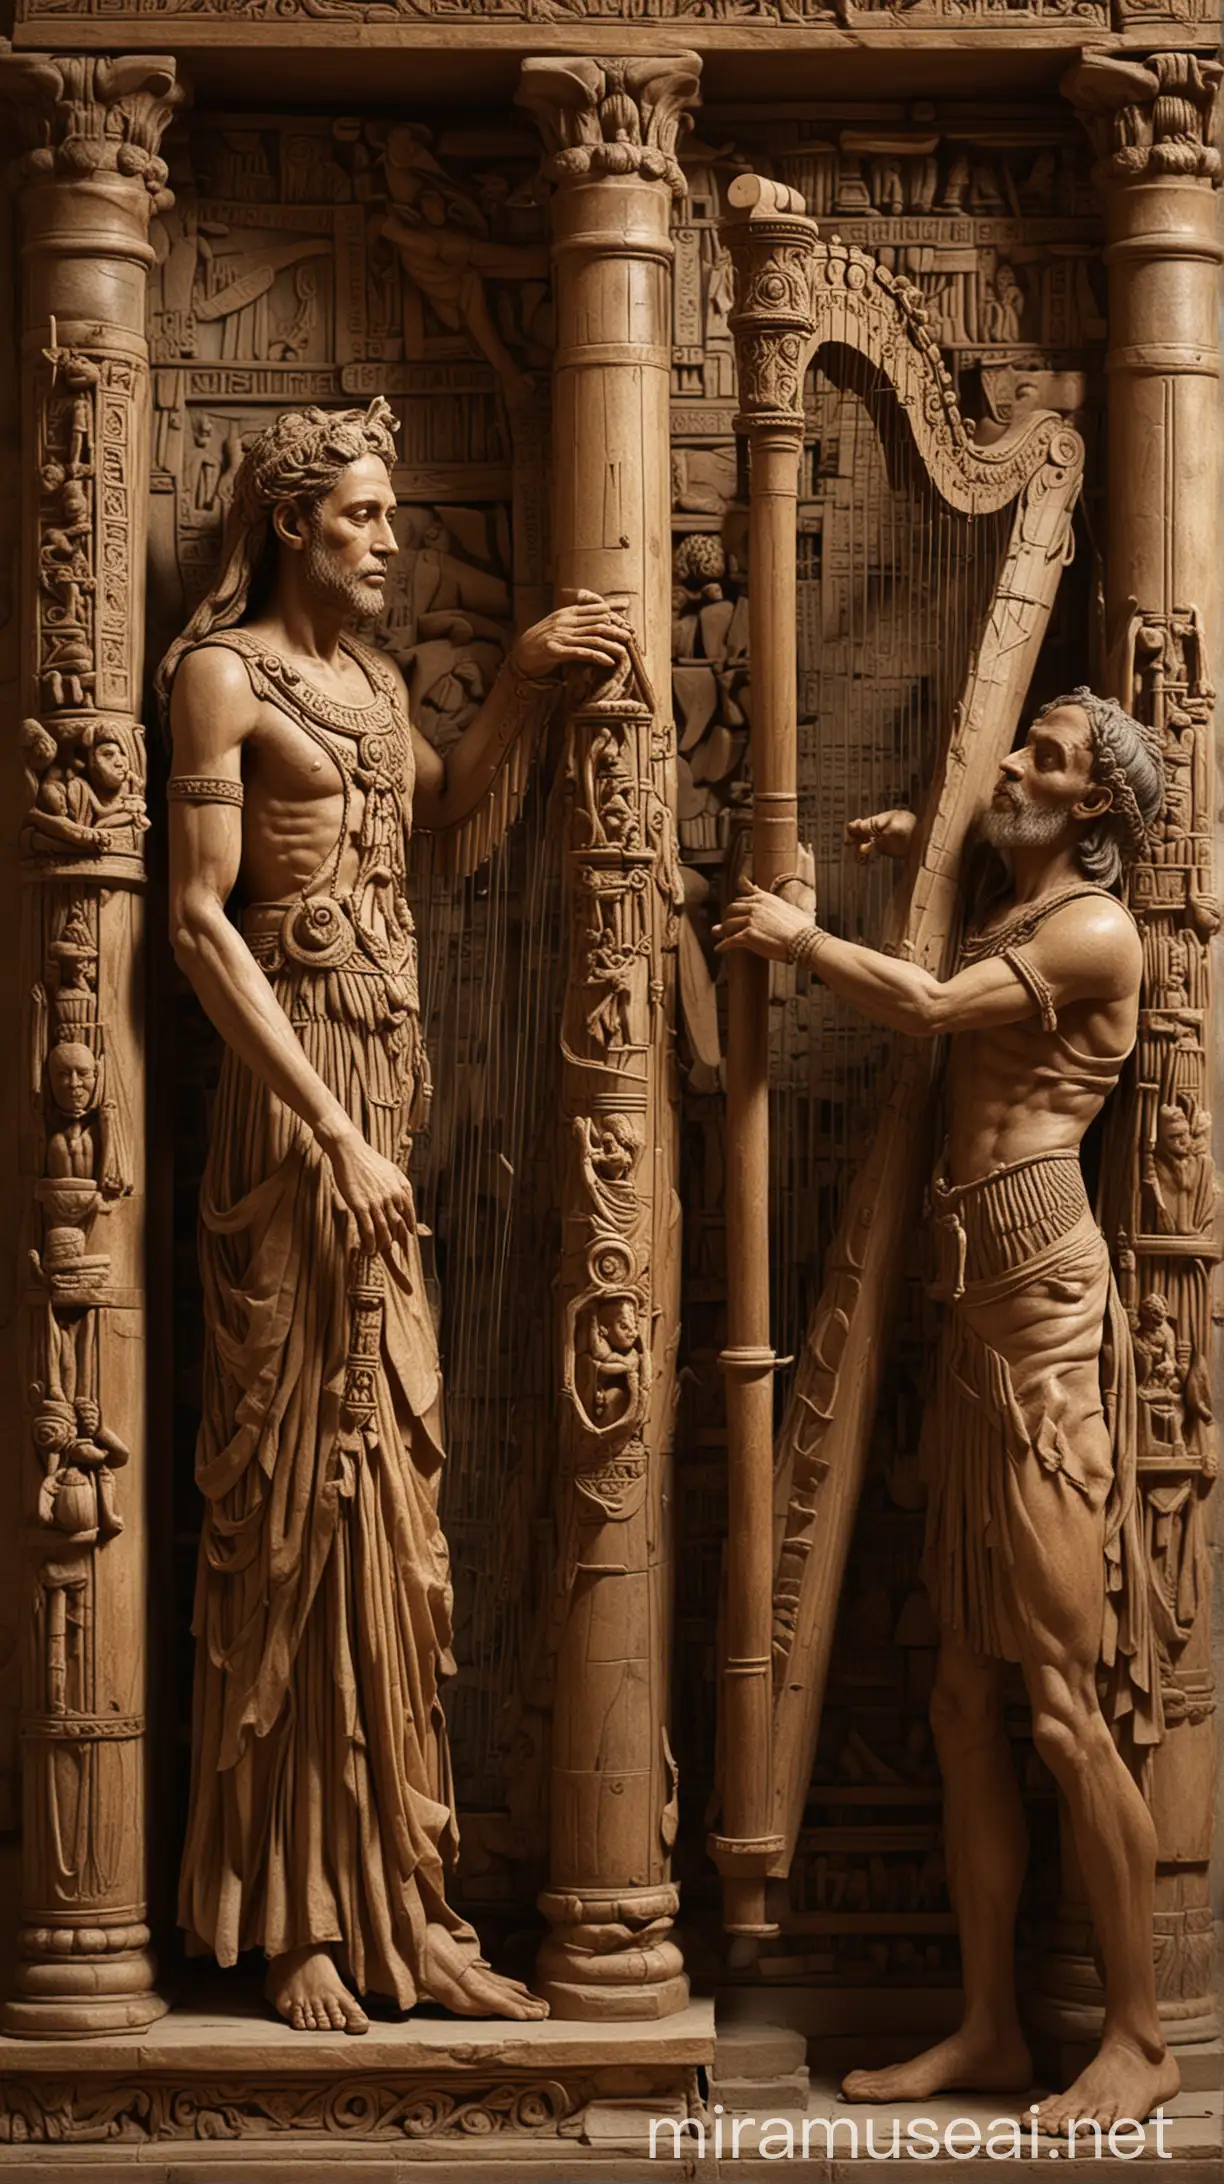 Jubal as an ancestor of musicians, playing a harp while another figure beside him plays an ancient organ. The scene should depict an early human gathering, with a focus on music and instruments."In ancient world 